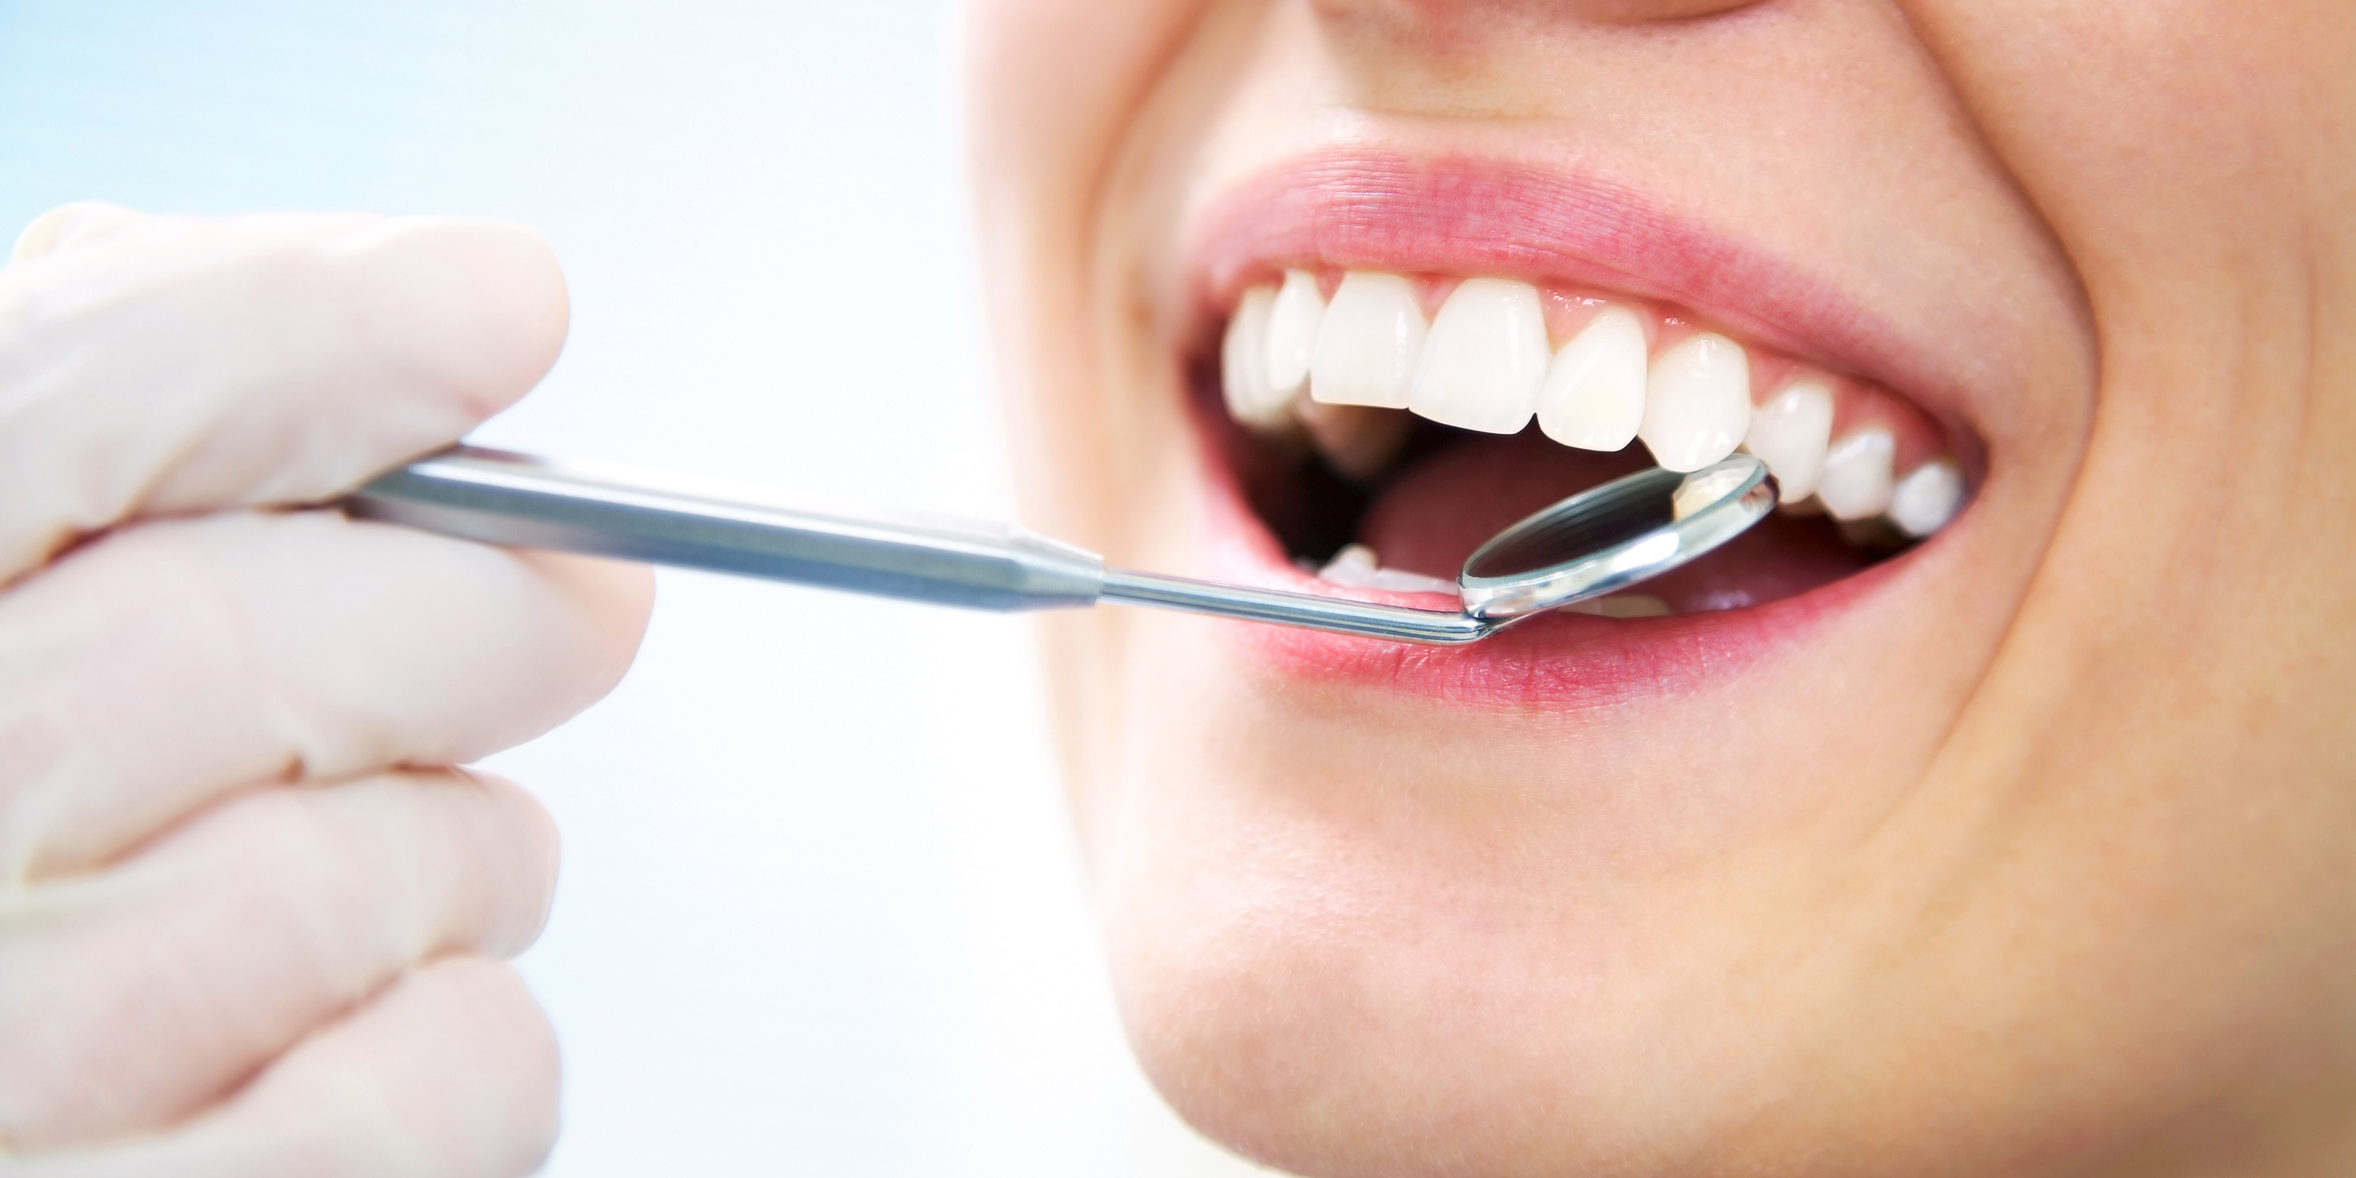 Featured image for “How Good Dental Hygiene Can Help Prevent Oral Cancer”